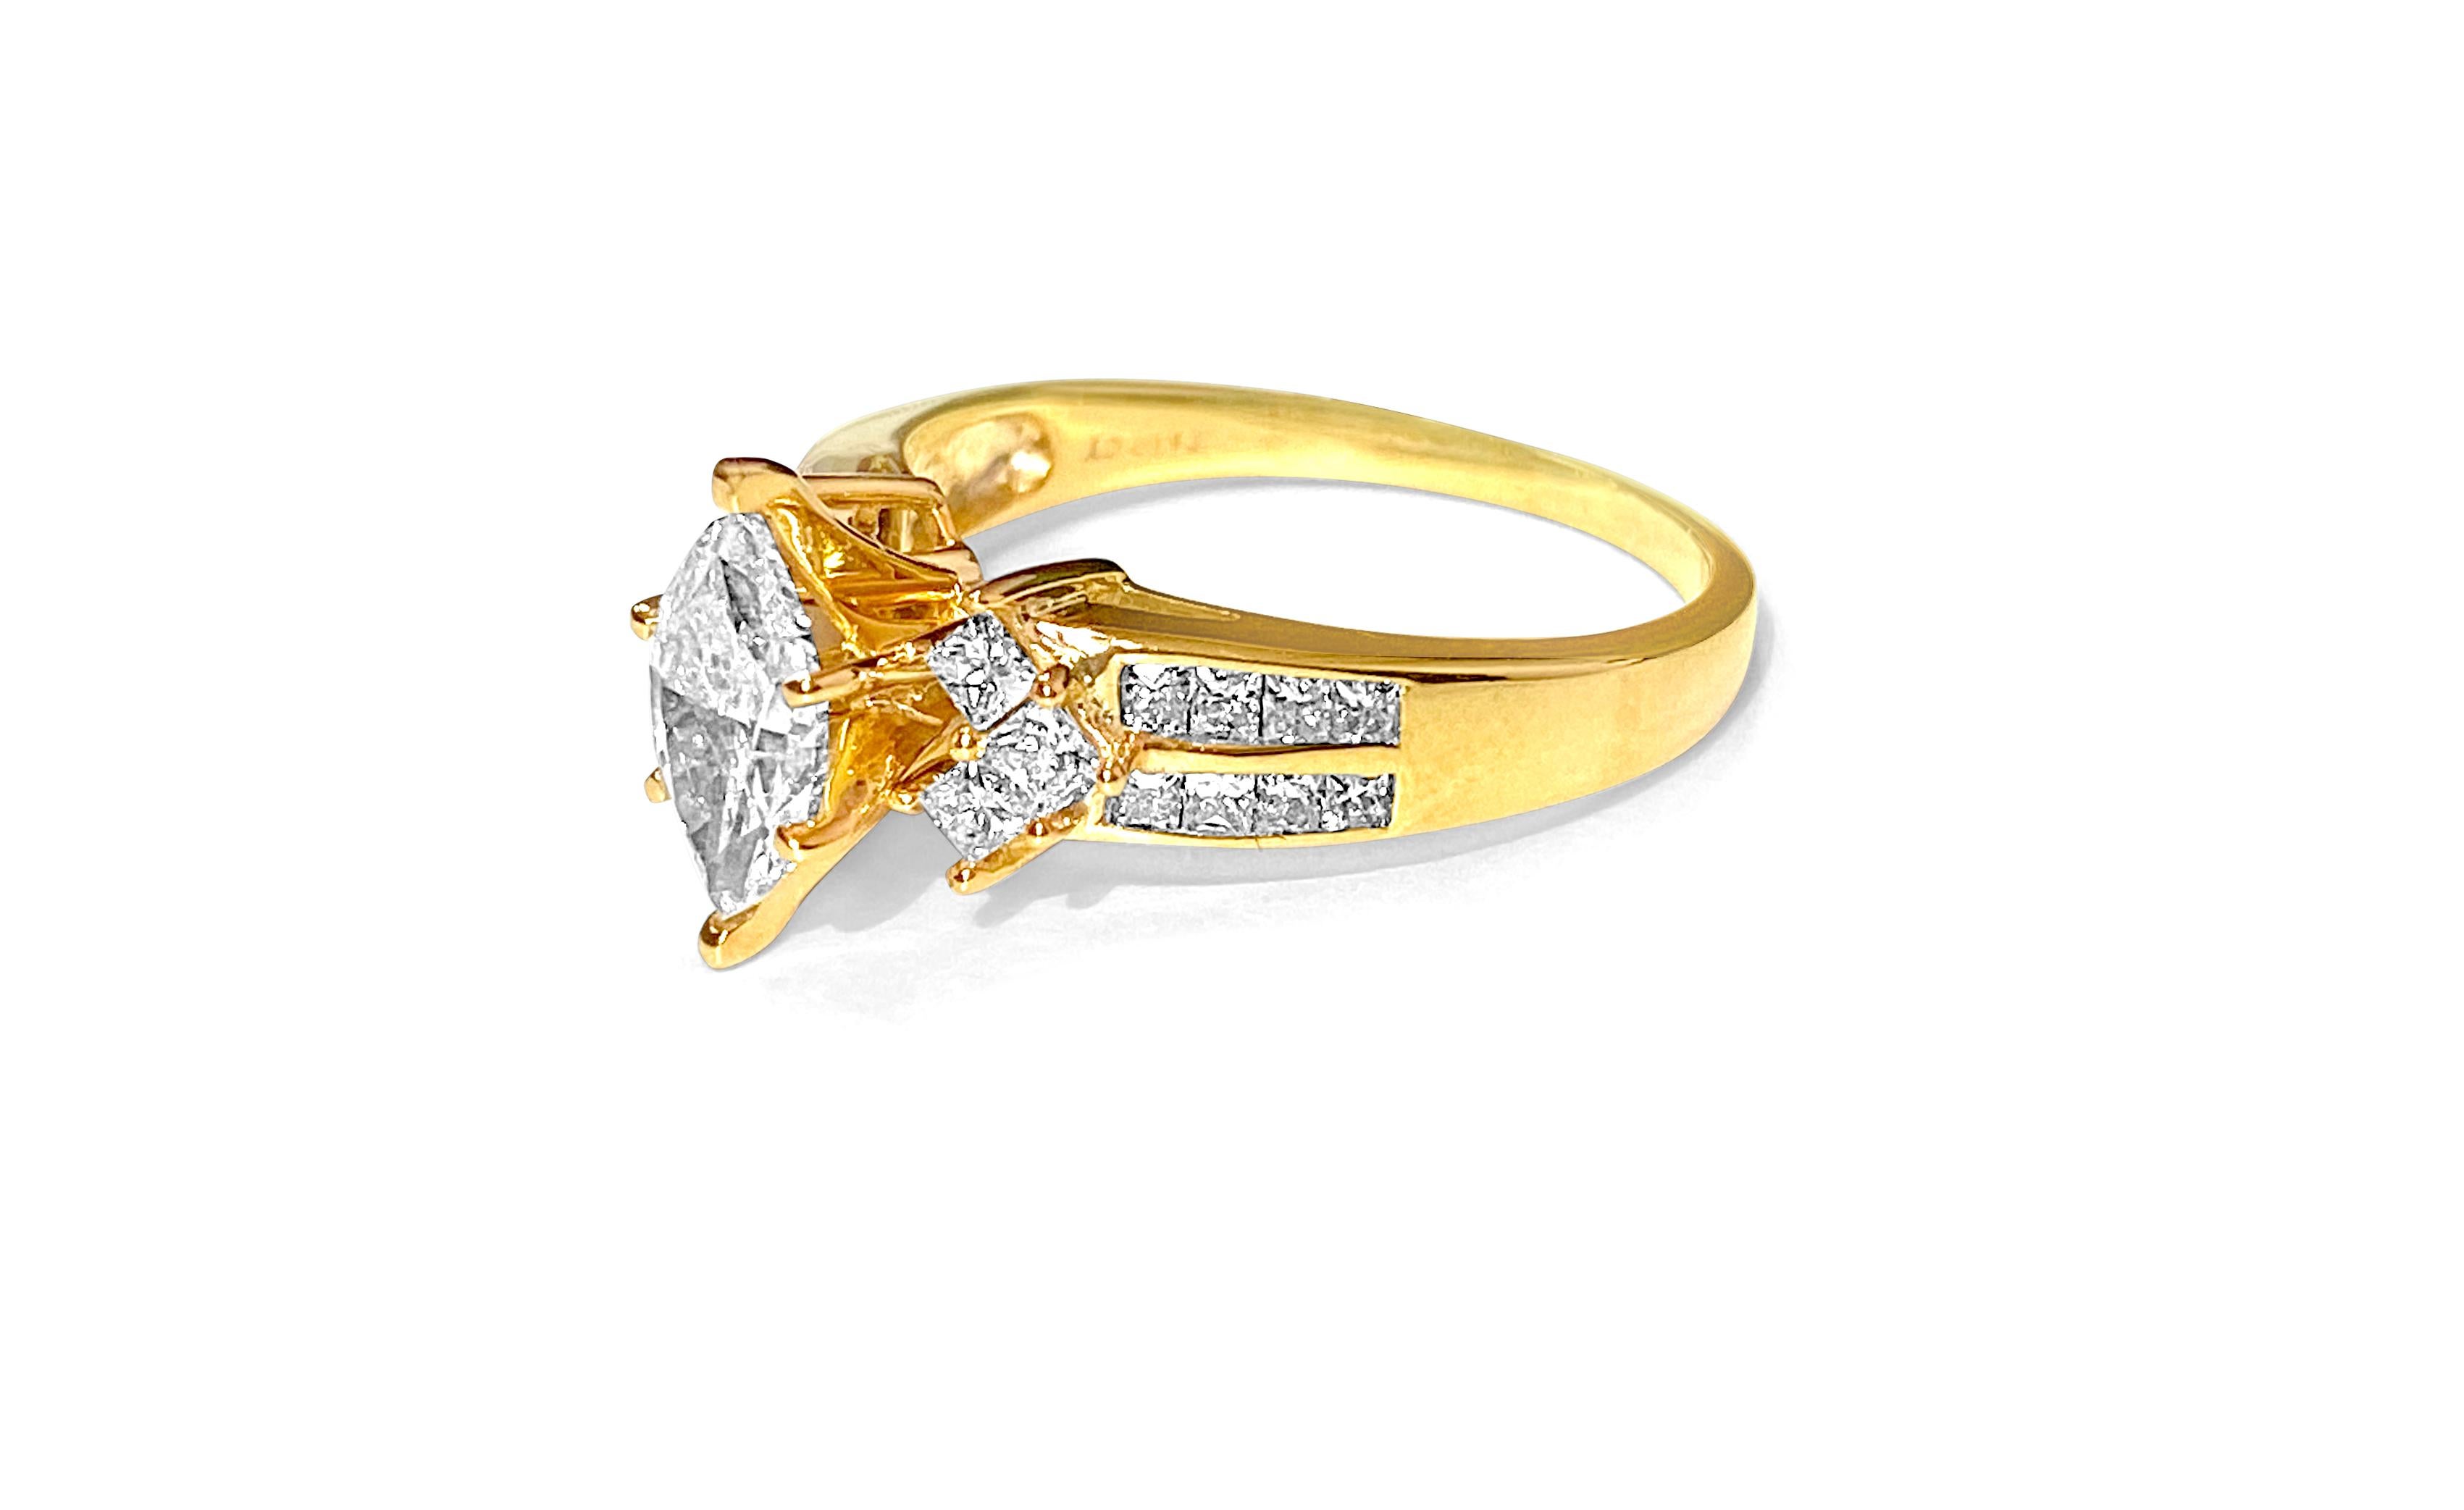 Women's 14K Yellow gold. 0.80CT Marquise Cut Diamond Ring For Sale